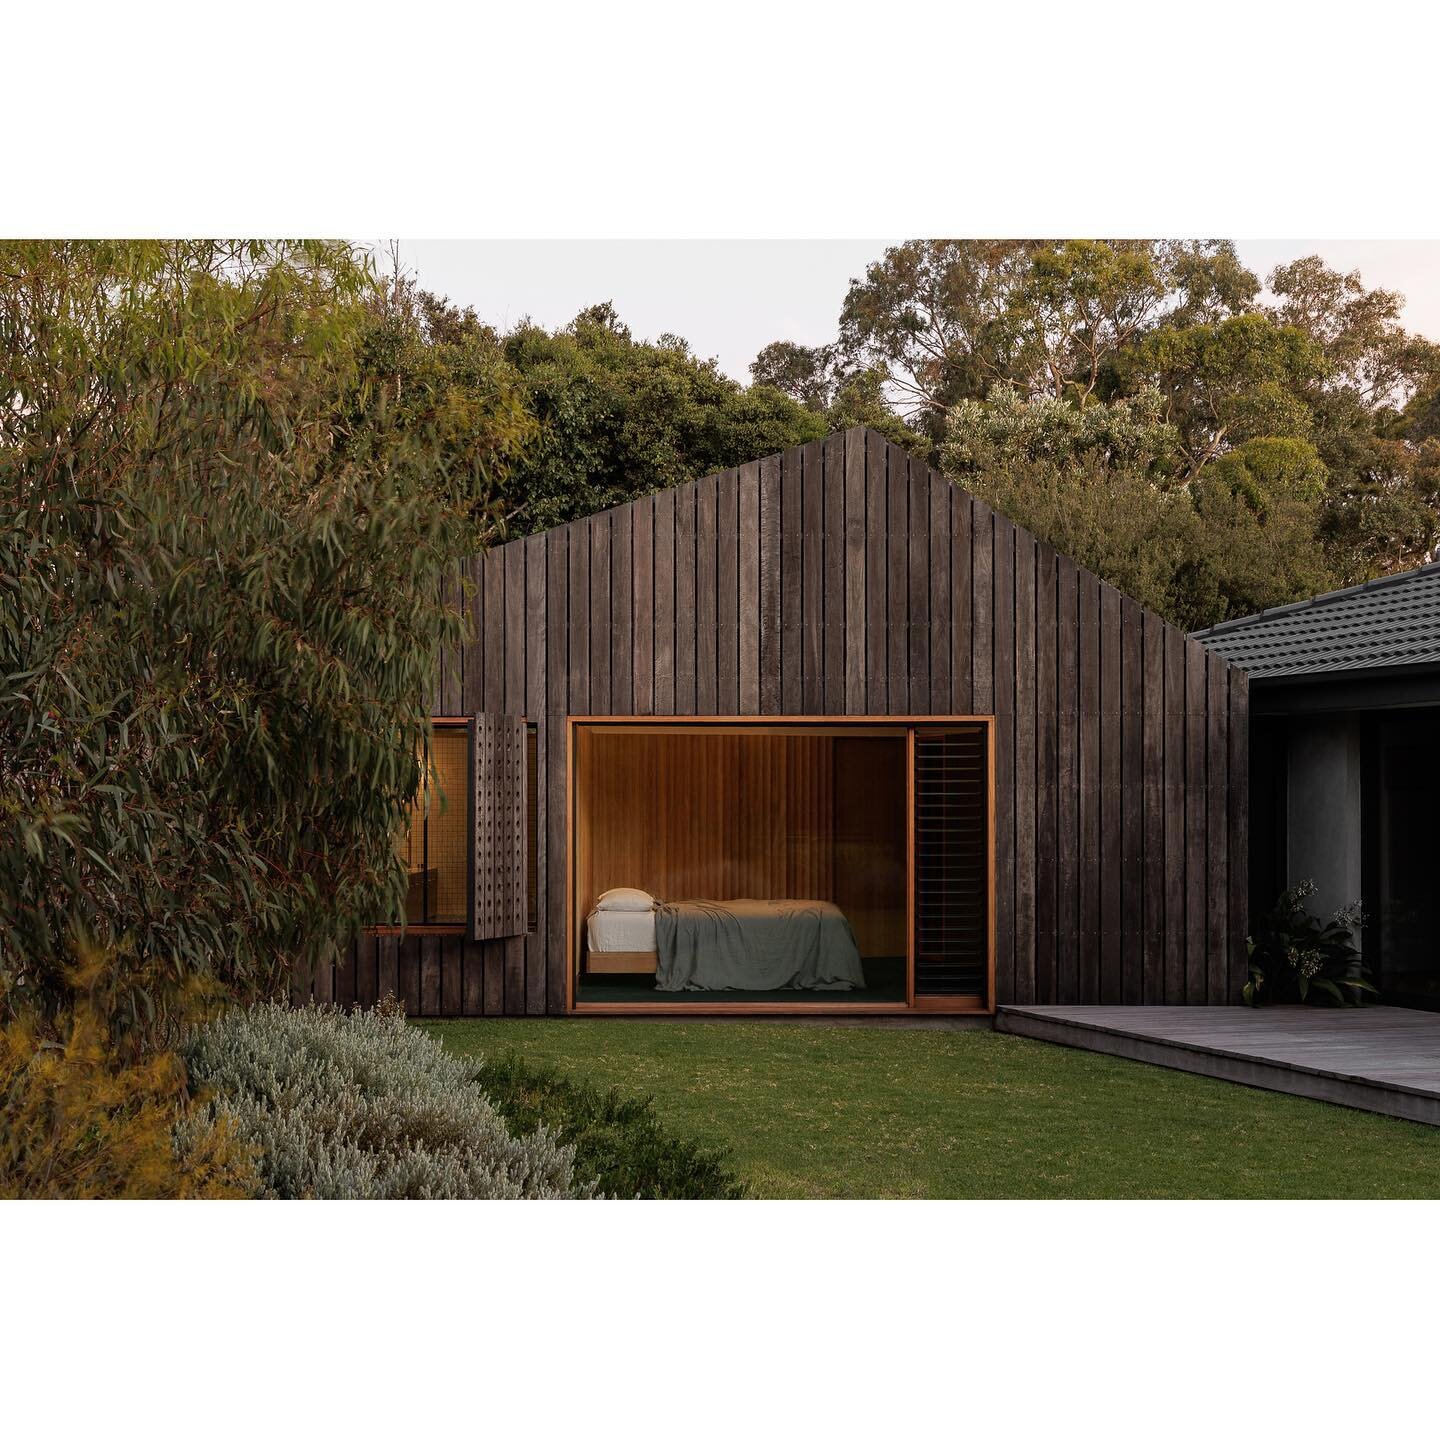 POINT LONSDALE HOUSE &bull; The built form of Point Lonsdale House is intricately related to its context. The addition was designed as a modern interpretation of a gable roof, with a sloping roofline that follows the angle of the site. This not only 